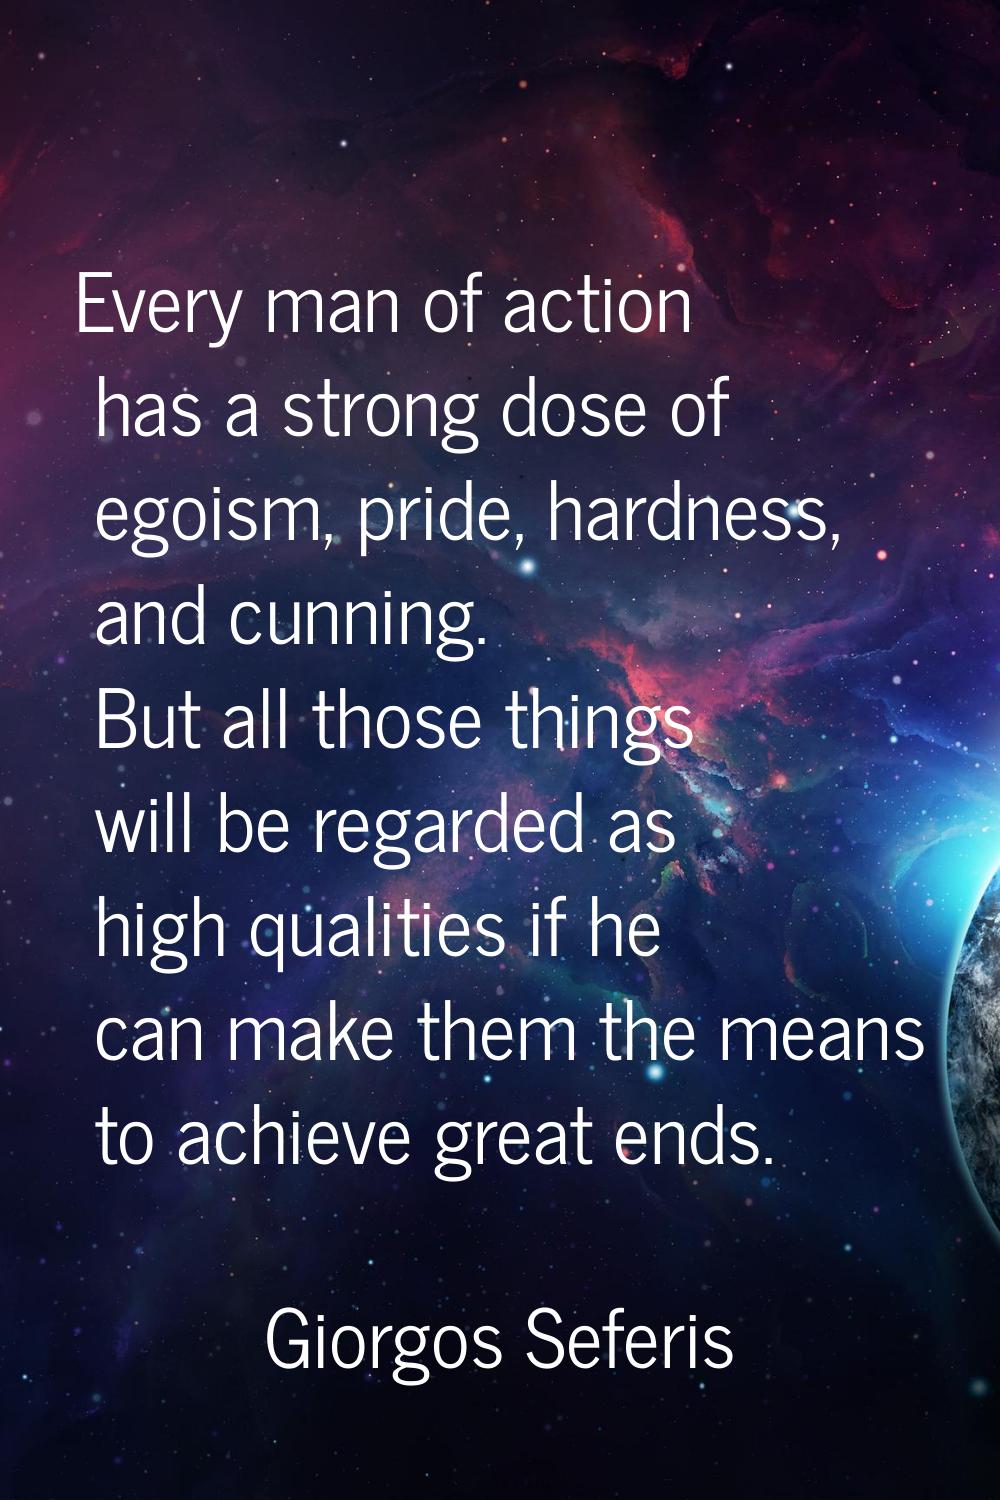 Every man of action has a strong dose of egoism, pride, hardness, and cunning. But all those things